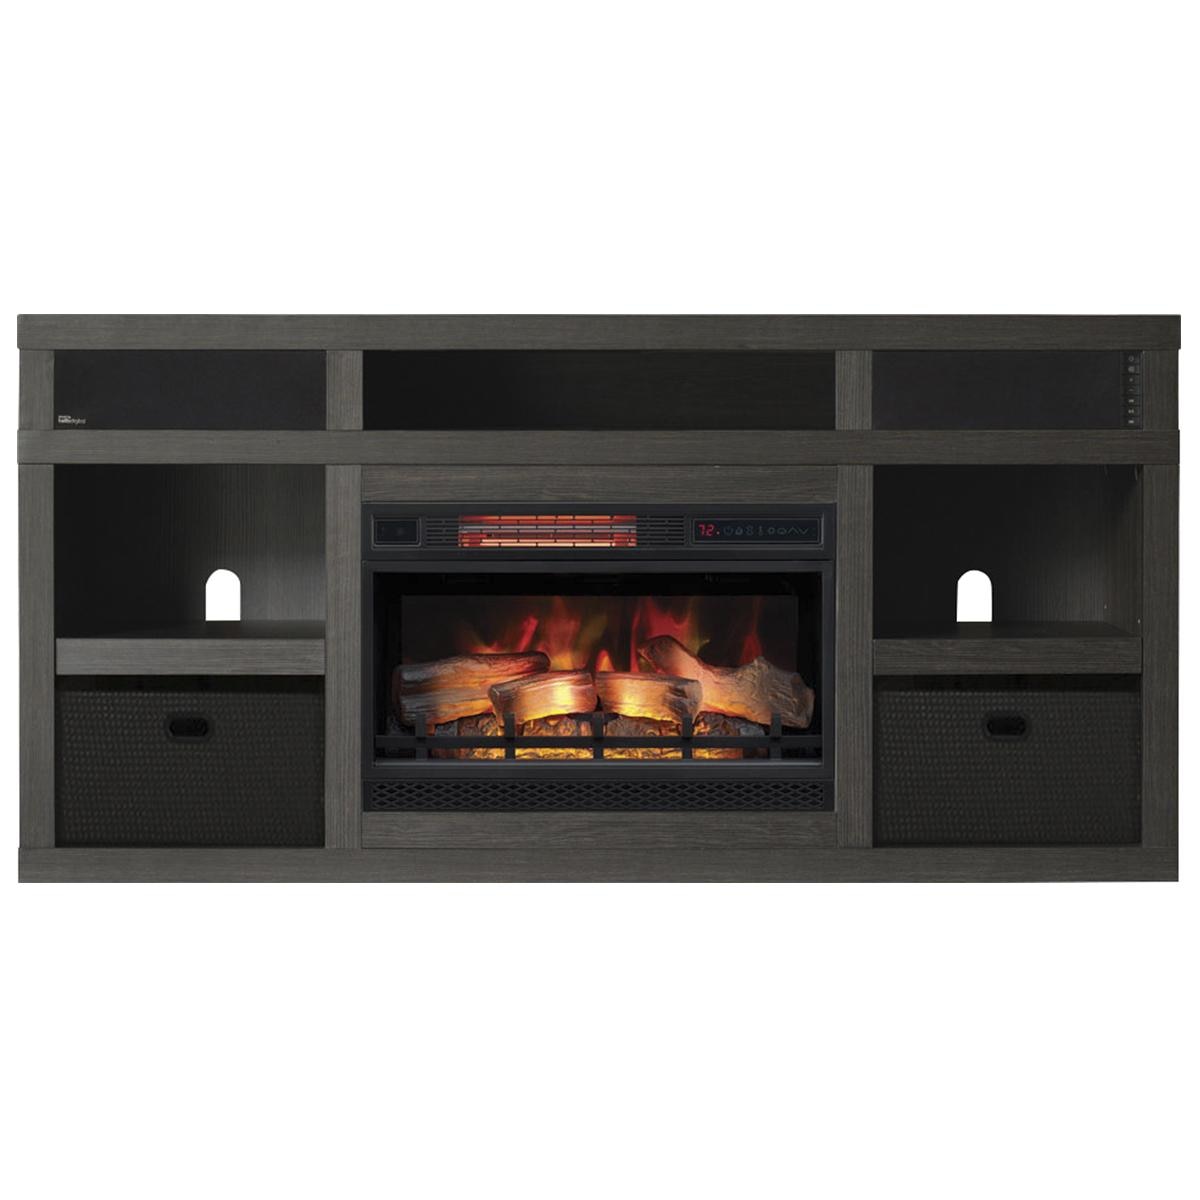 Tv and Fire Wall Elegant Fabio Flames Greatlin 3 Piece Fireplace Entertainment Wall